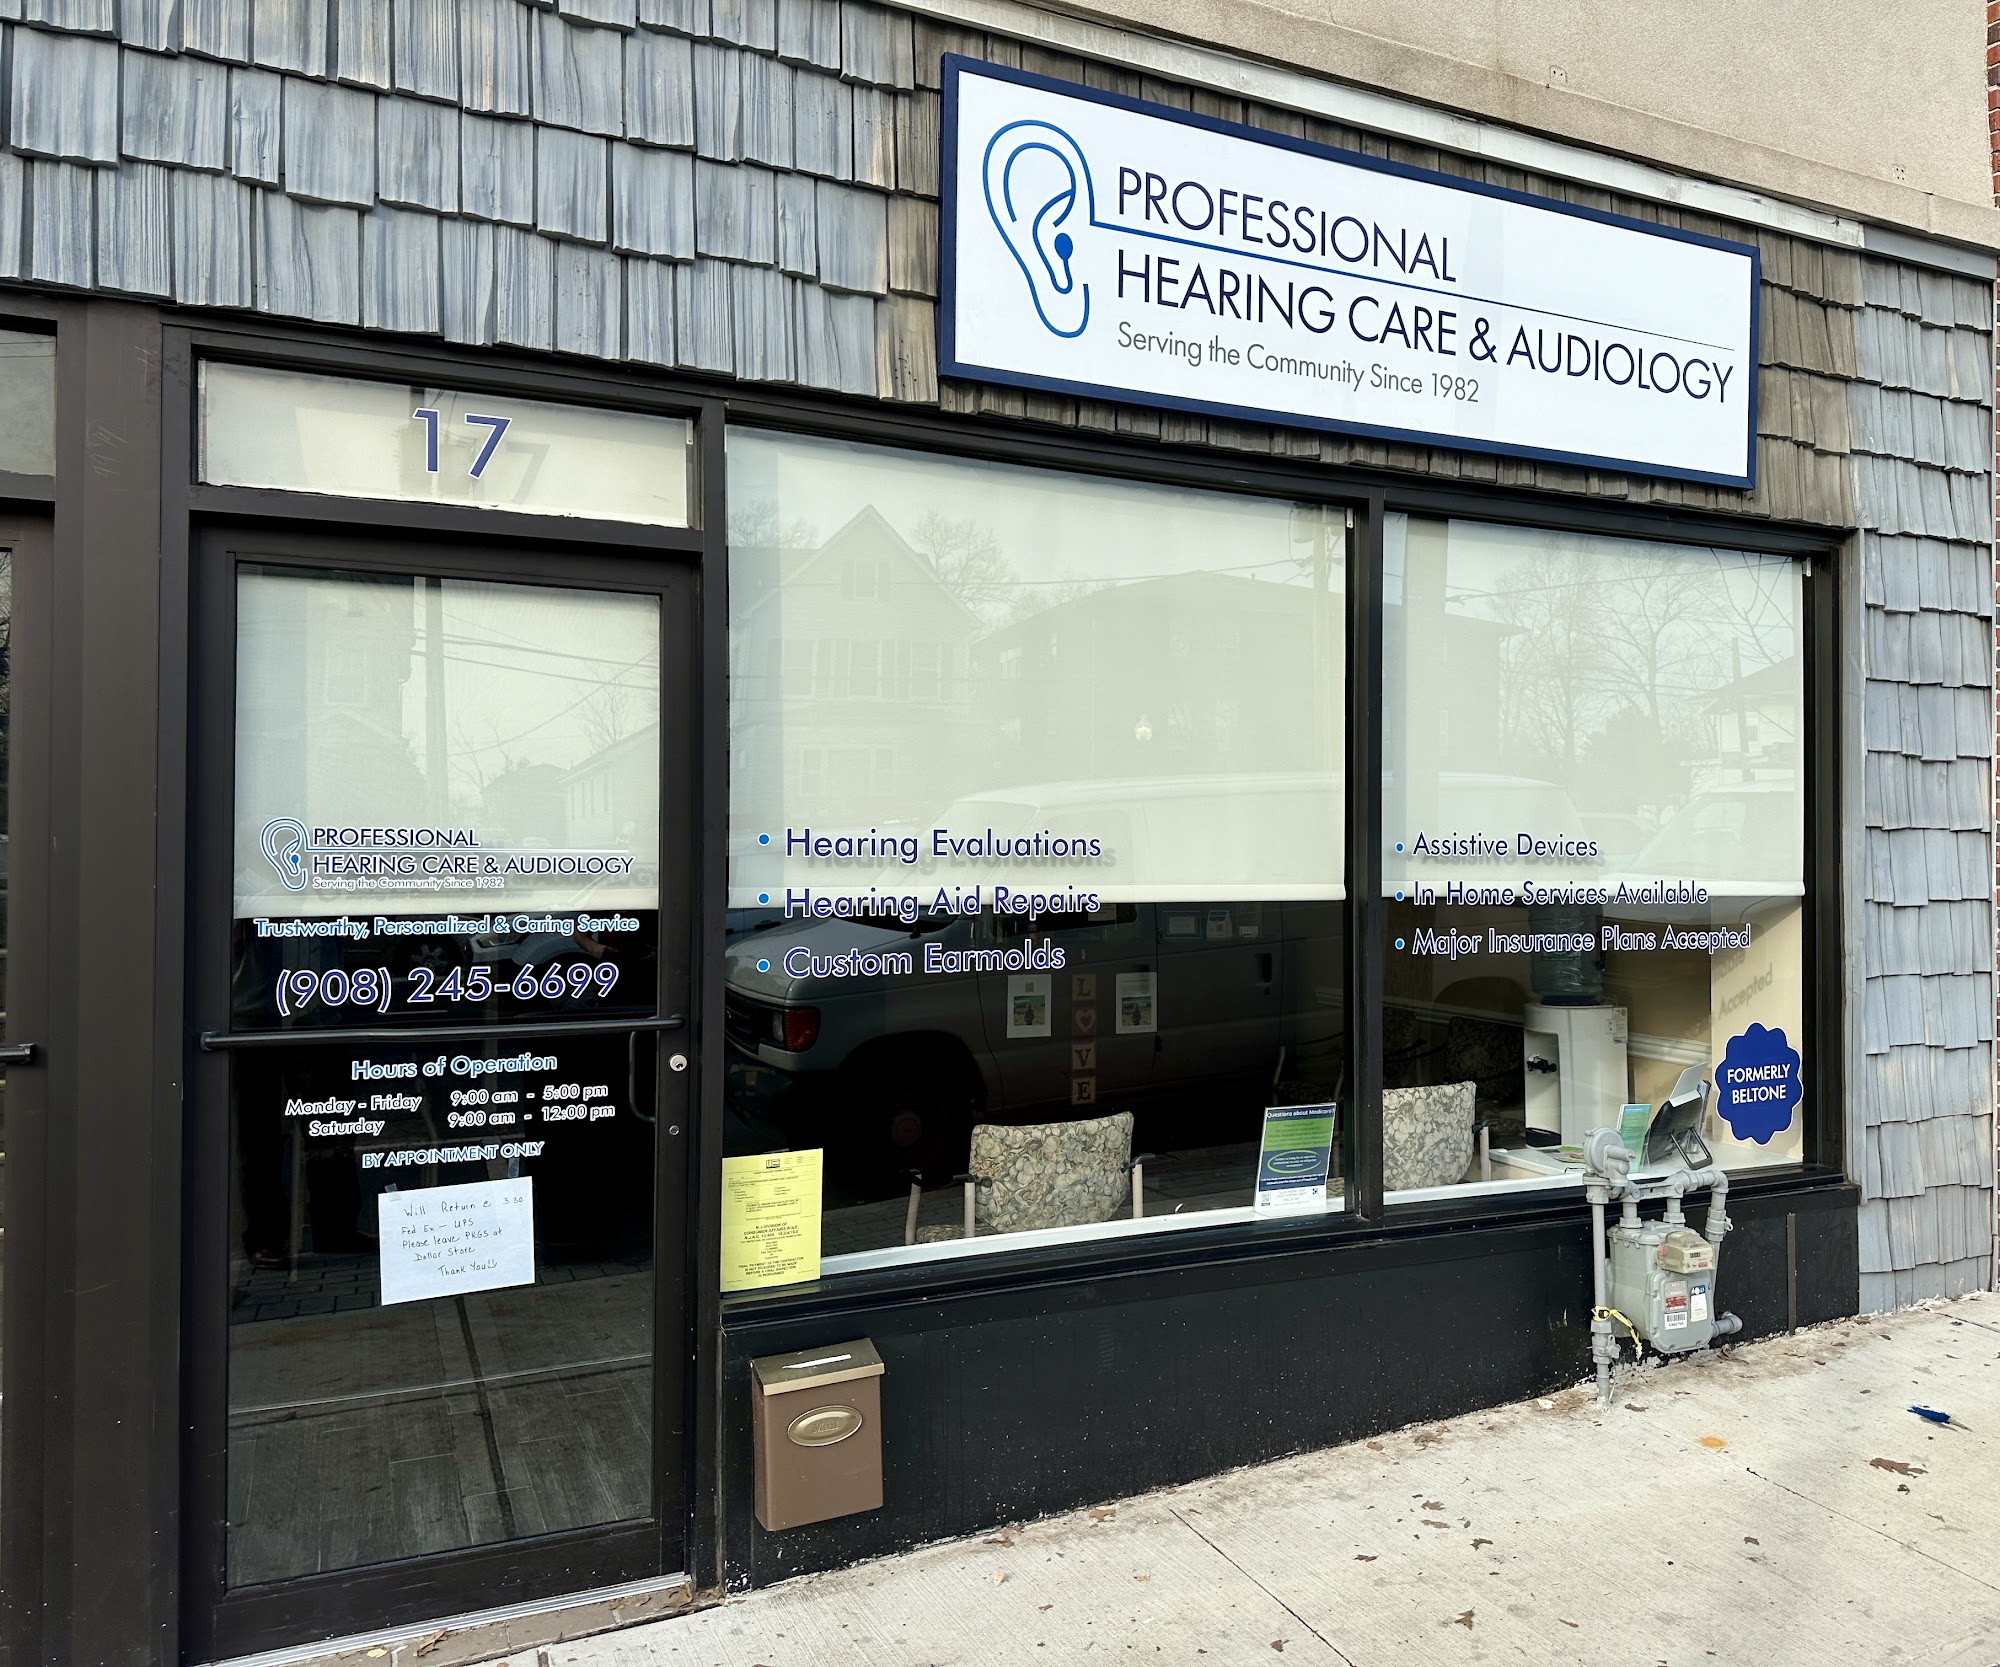 Professional Hearing Care & Audiology